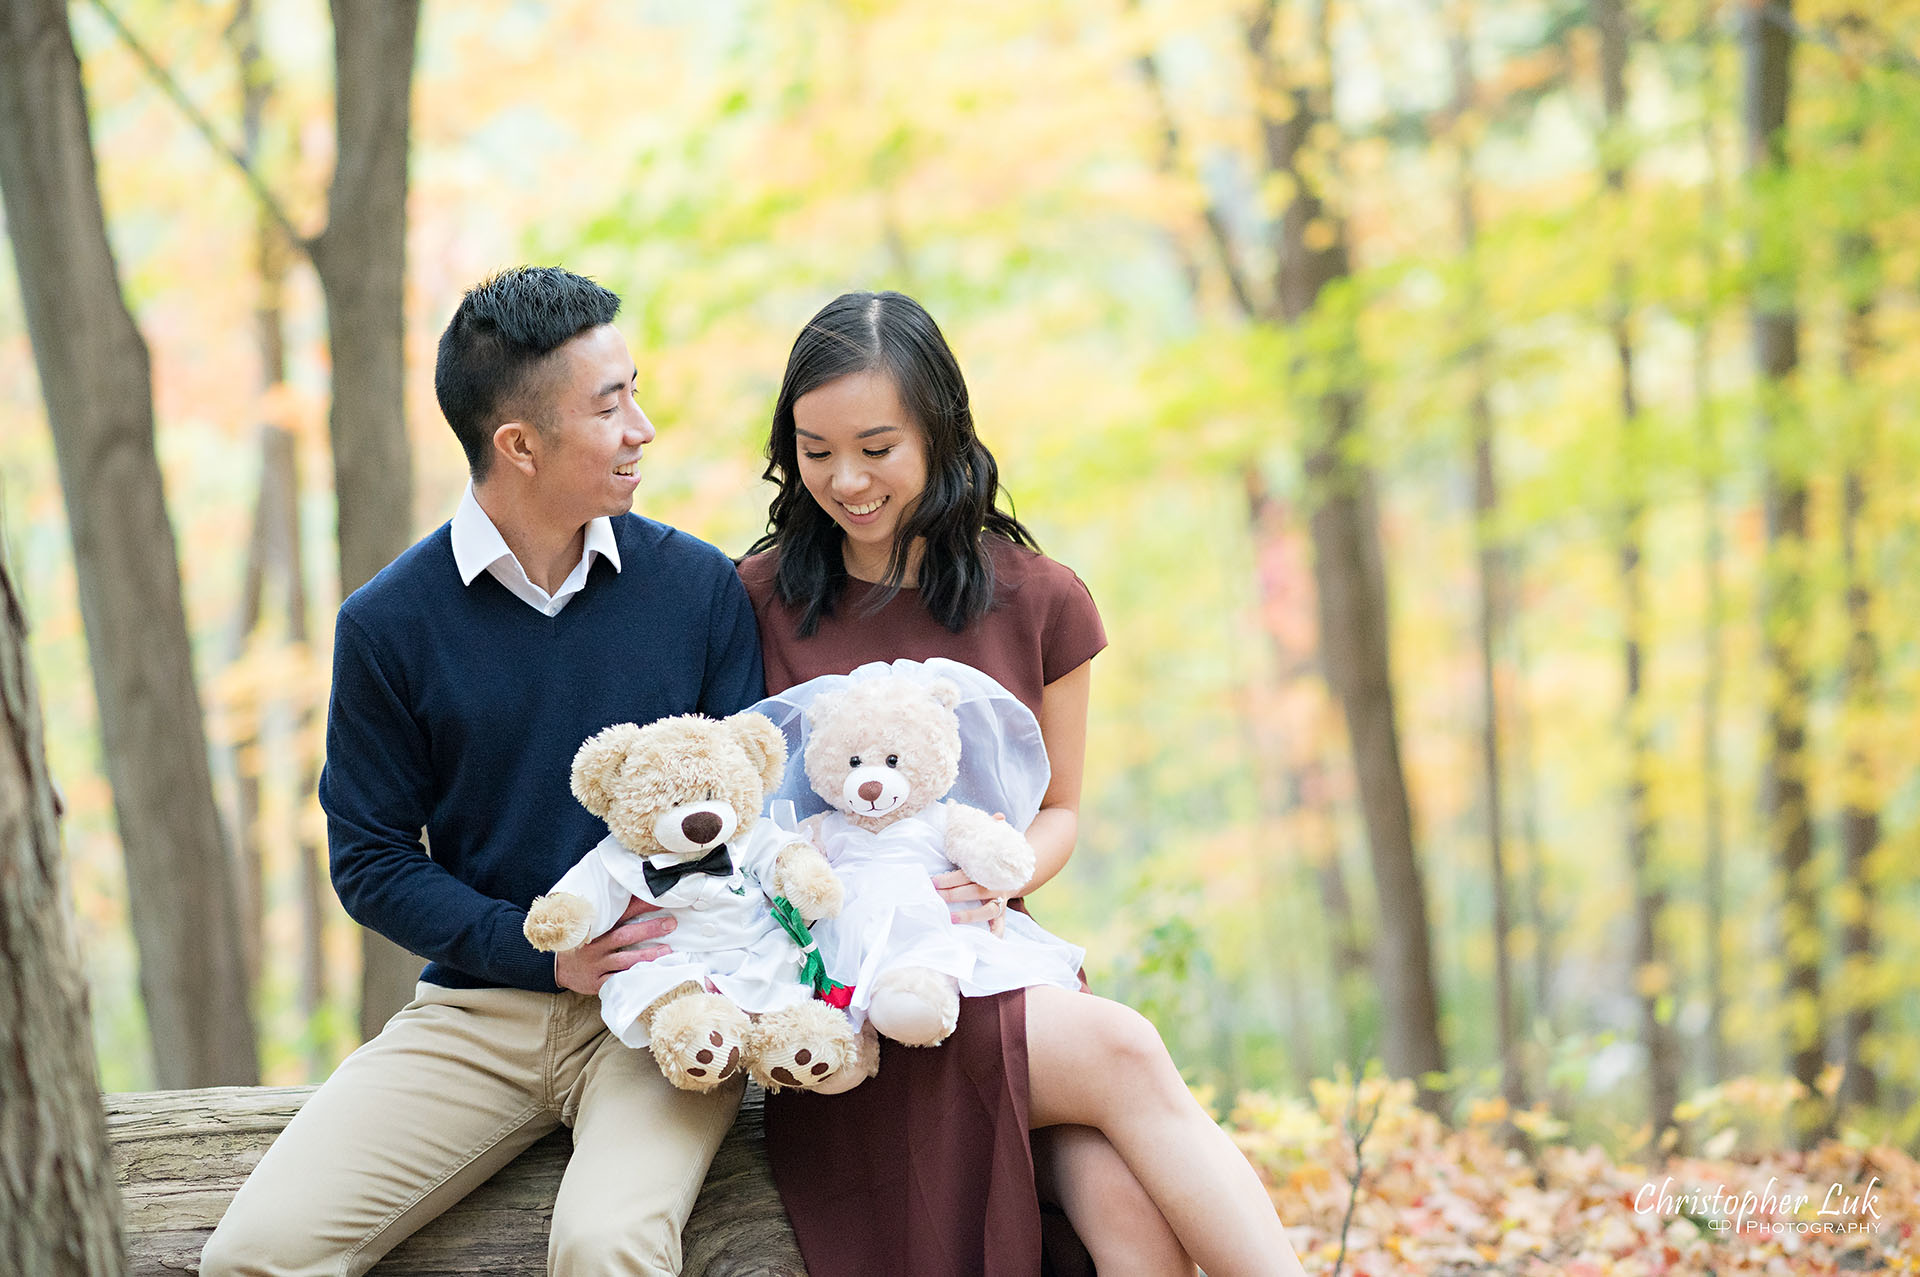 Christopher Luk Toronto Wedding Engagement Session Photographer Autumn Fall Leaves Natural Candid Photojournalistic Bride Groom Hiking Trail Stuffed Animal WongFu Productions Spencer Bear Trees Log Smiling Happy Together Landscape